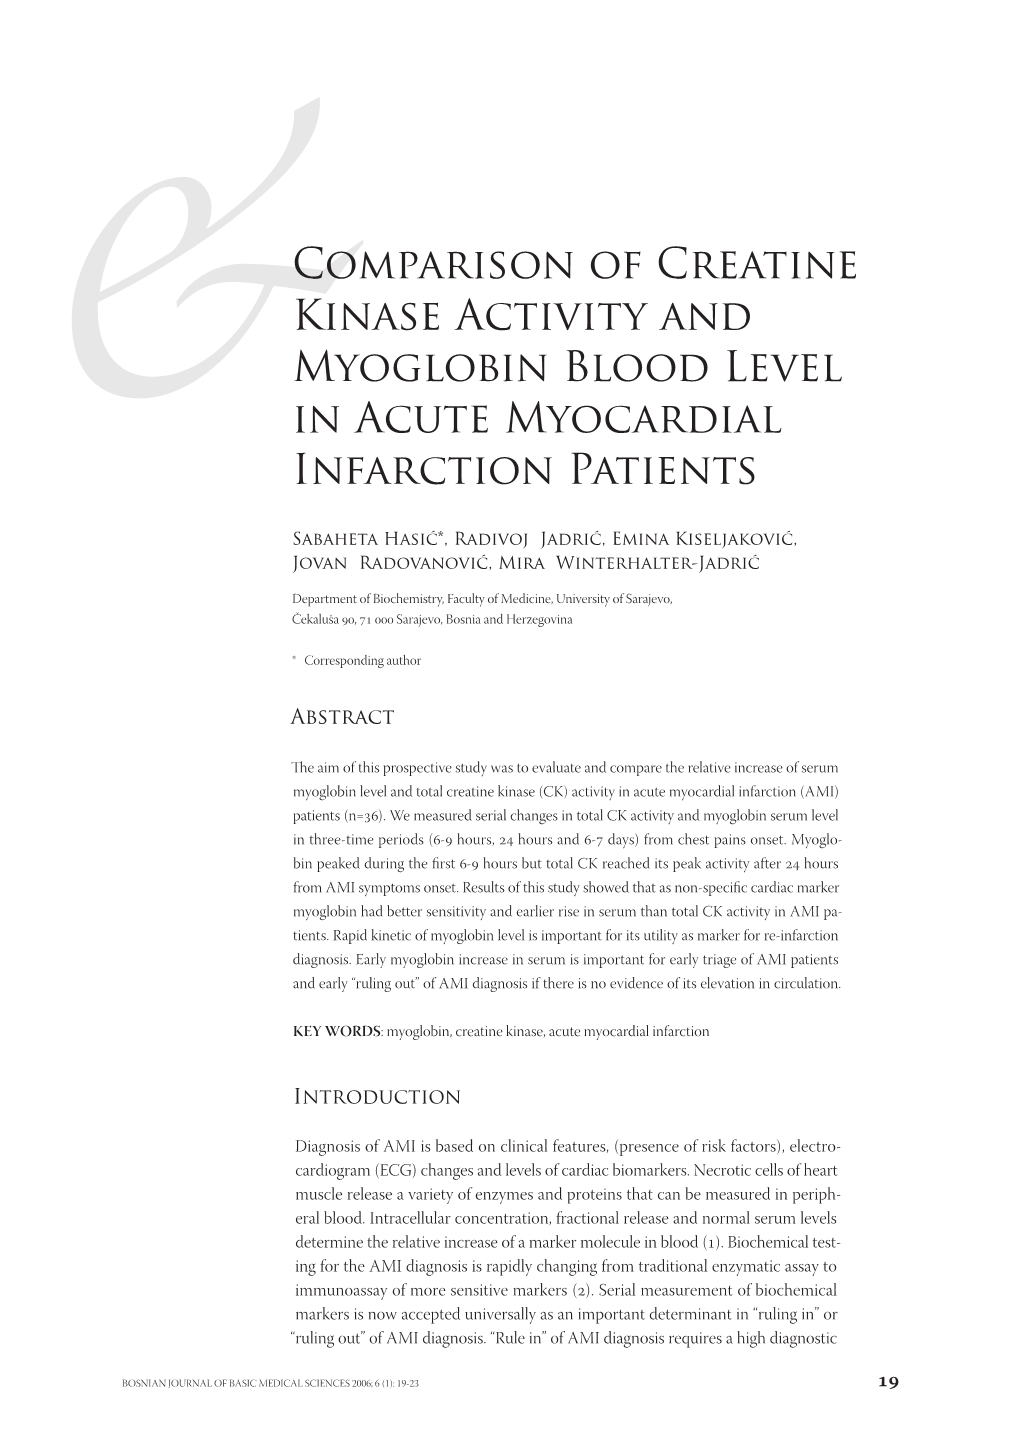 Comparison of Creatine Kinase Activity and Myoglobin Blood Level in Acute Myocardial Infarction Patients